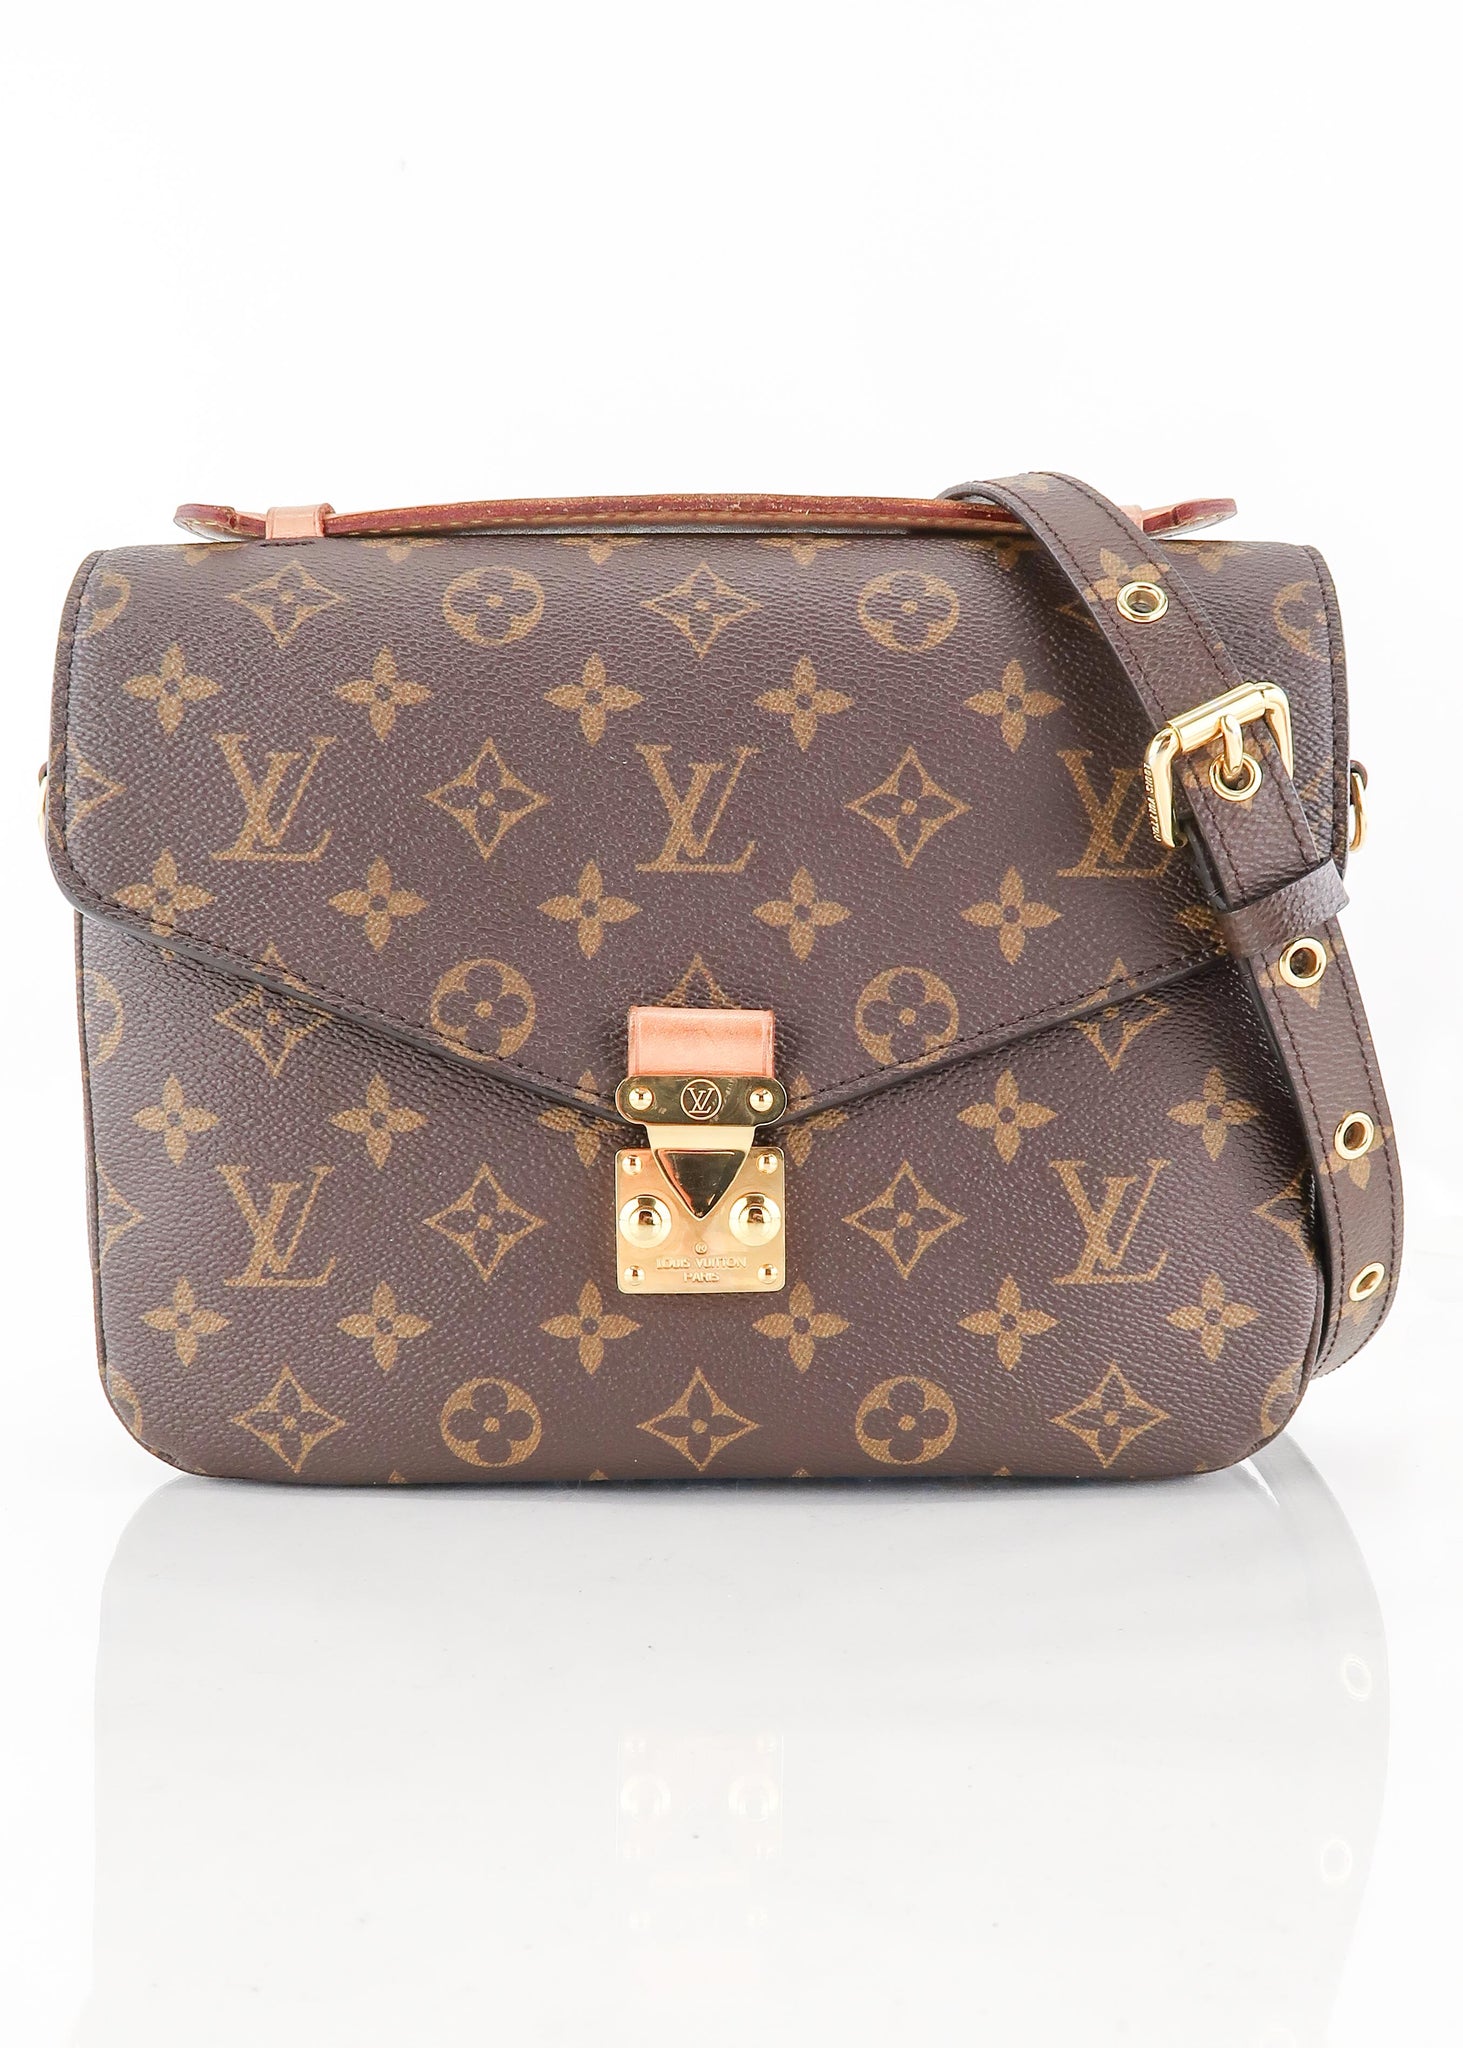 Louis Vuitton - Authenticated Metis Handbag - Cloth Brown for Women, Very Good Condition